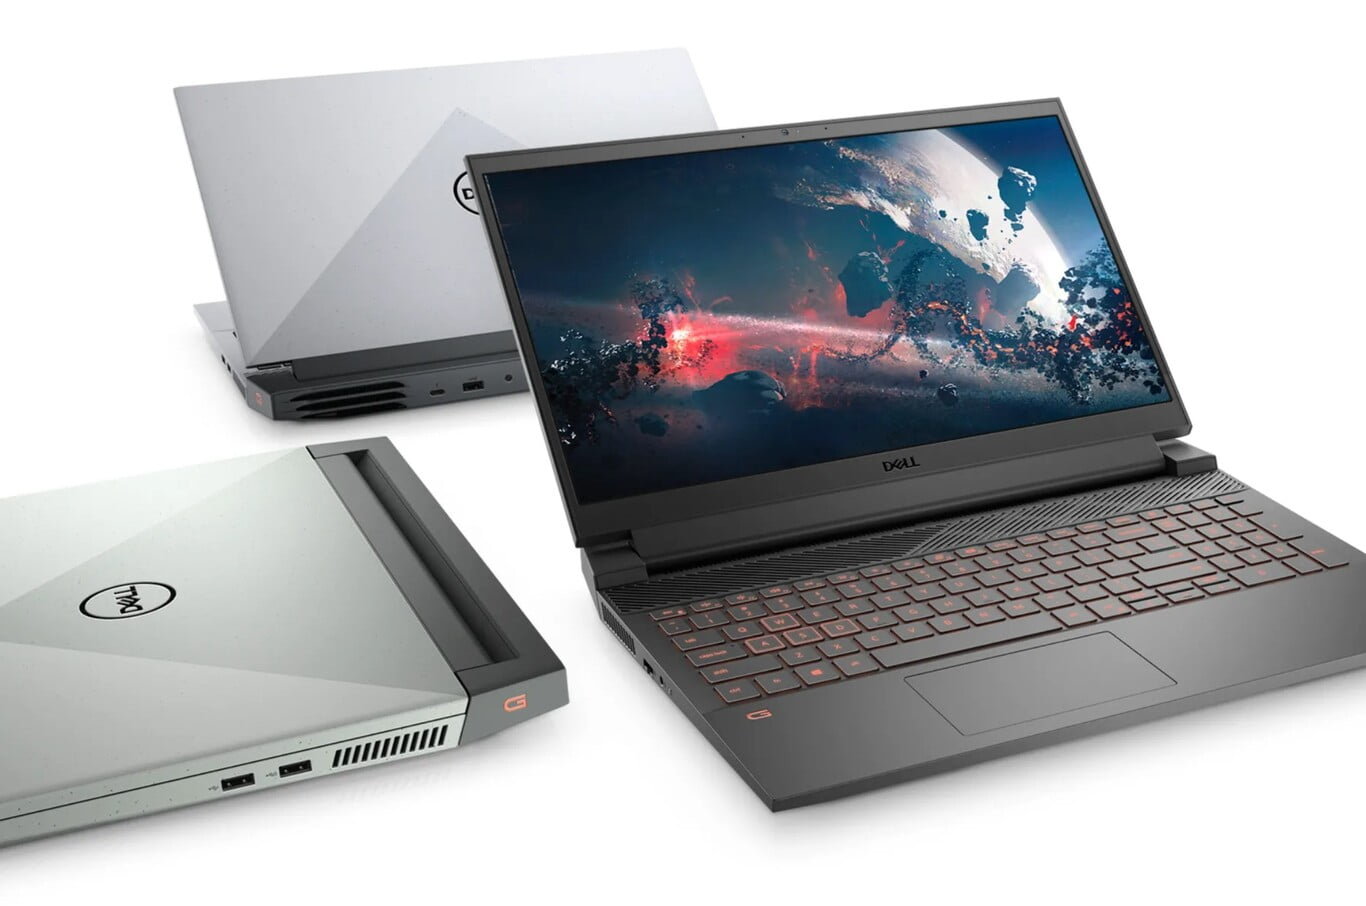 Dell G15 Ryzen Edition gaming laptop is presented: Specs, price and release date